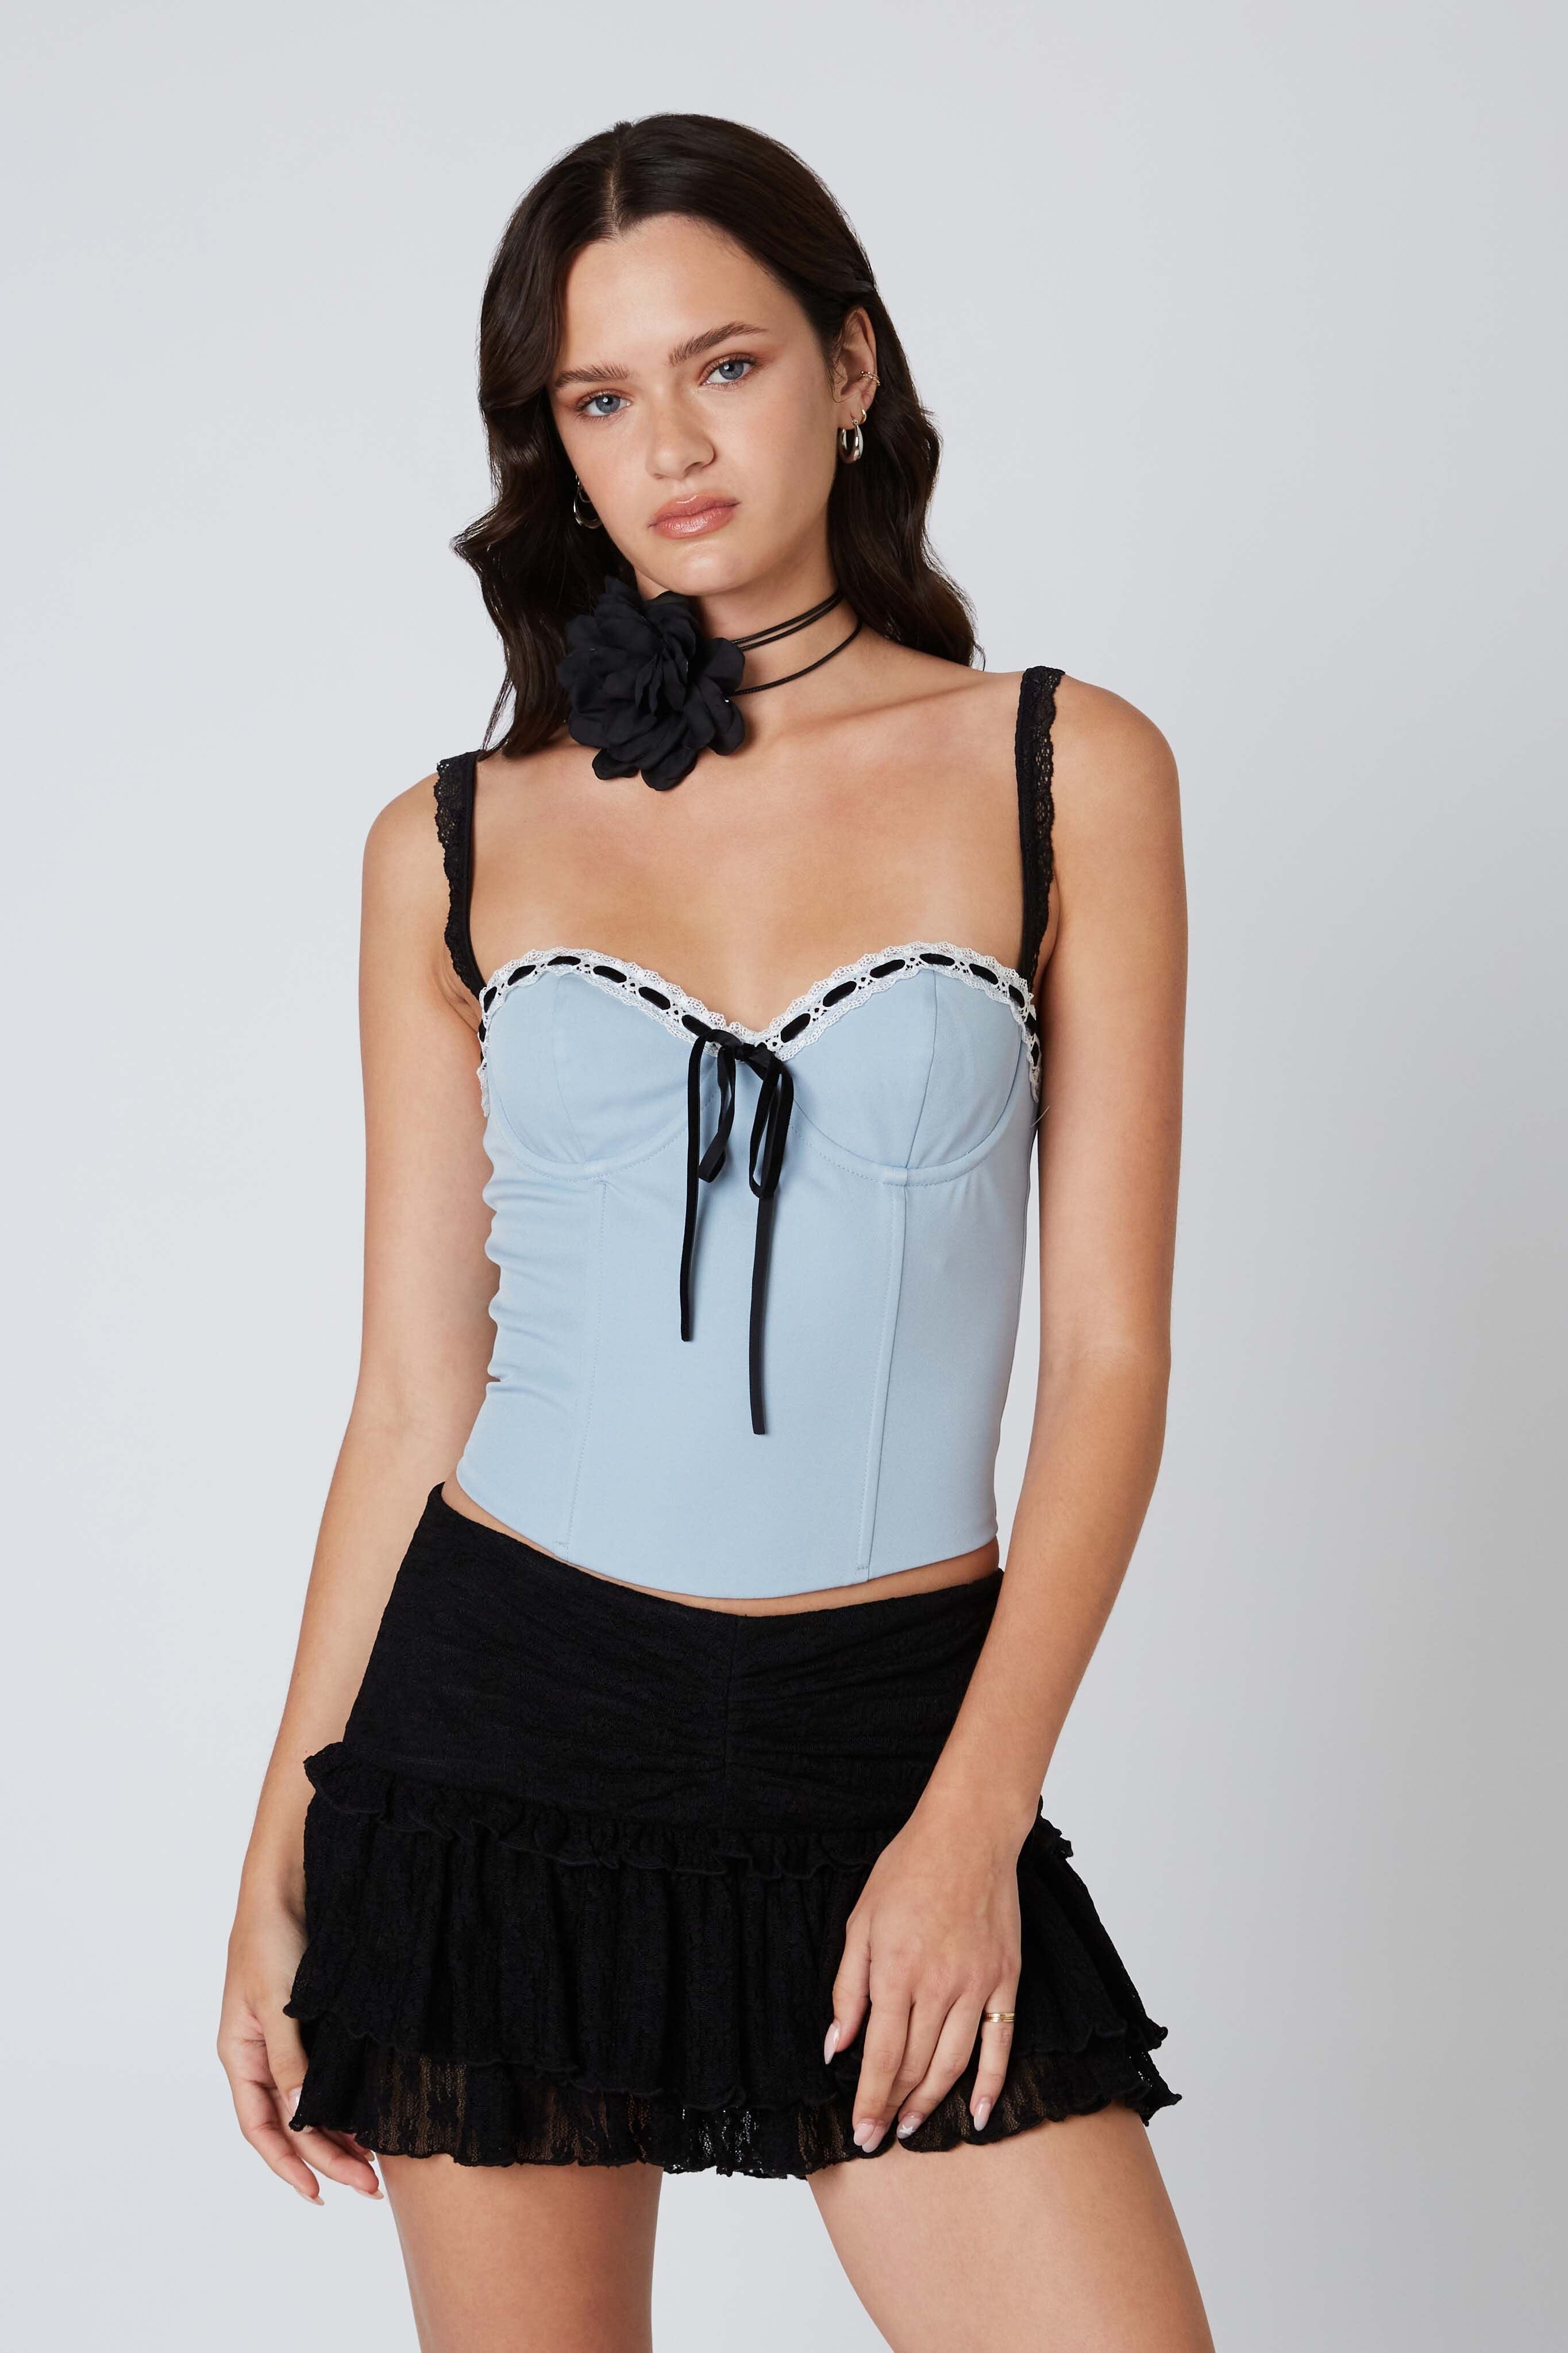 Ribbon & Lace corset top with push-up bra and cutout back 34B